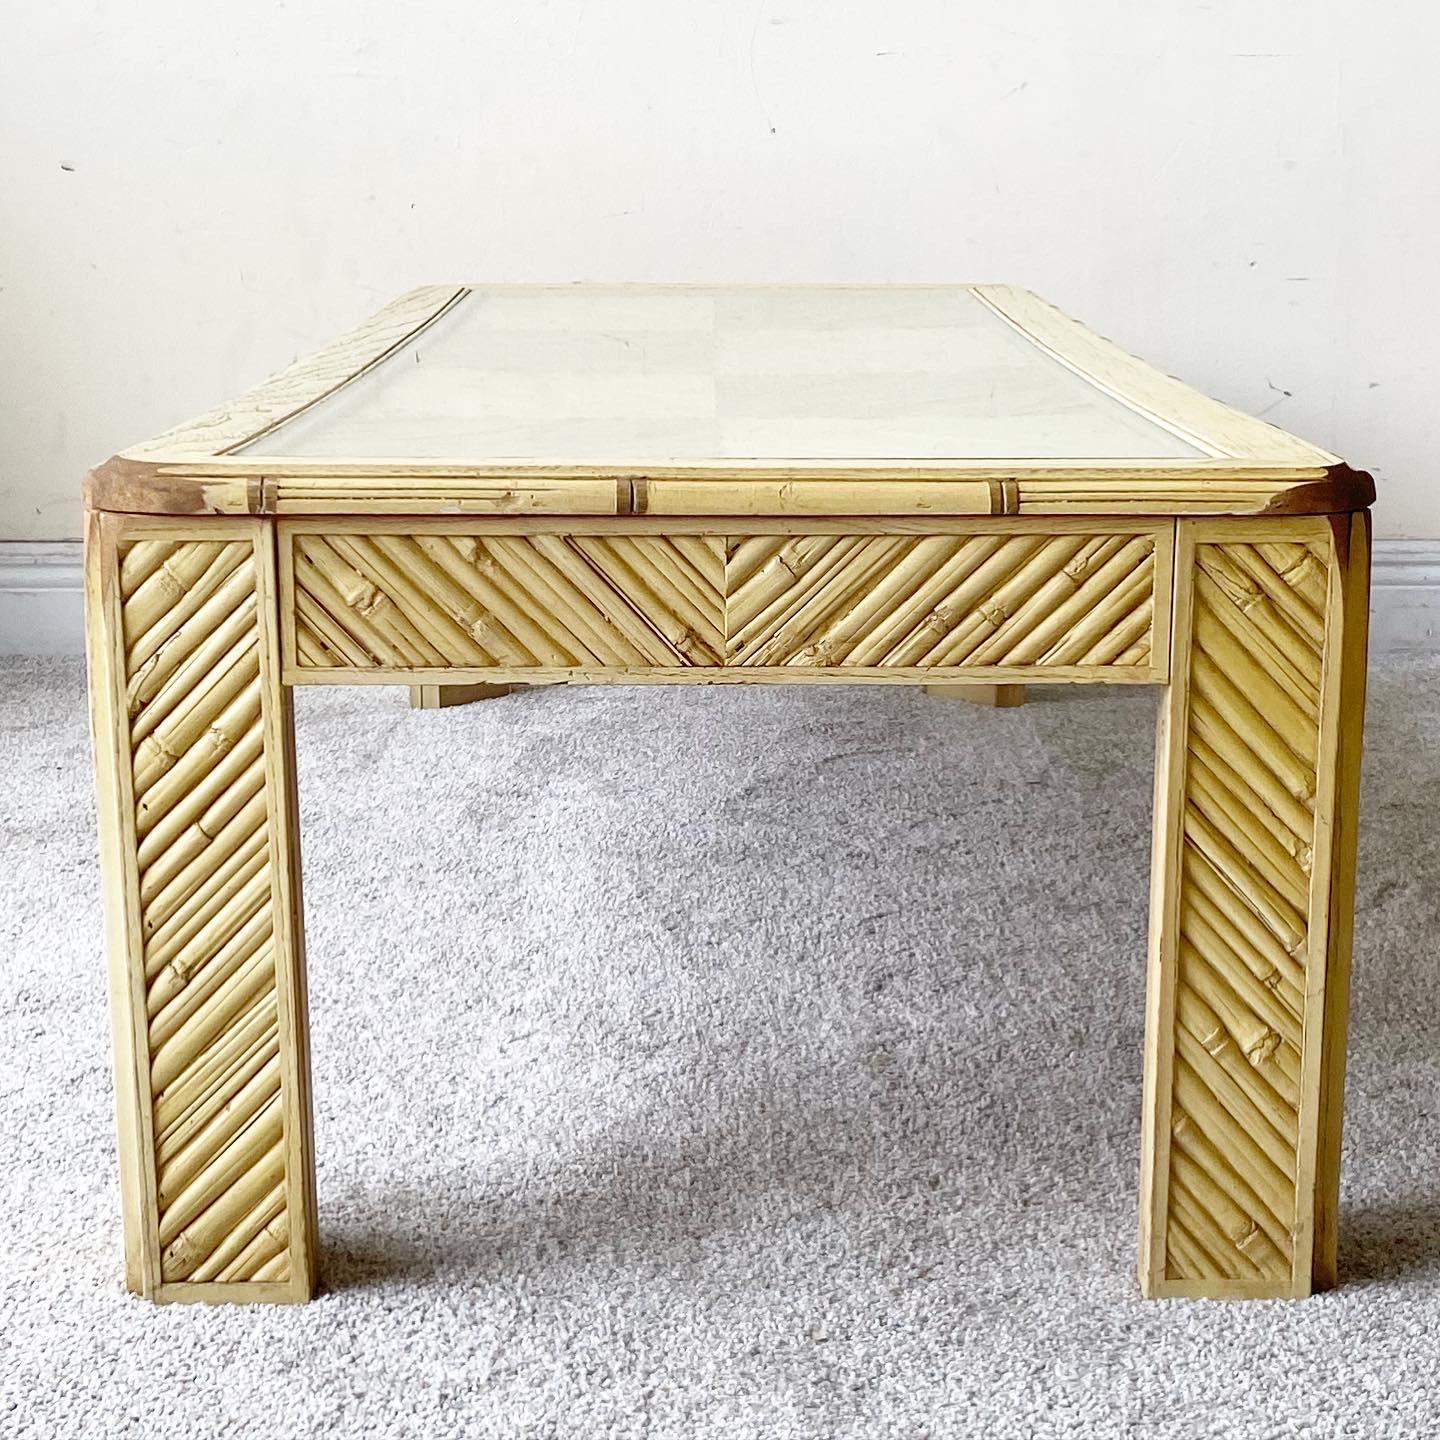 Bohemian Vintage Boho Chic Faux Bamboo and Reed Glass Top Coffee Table